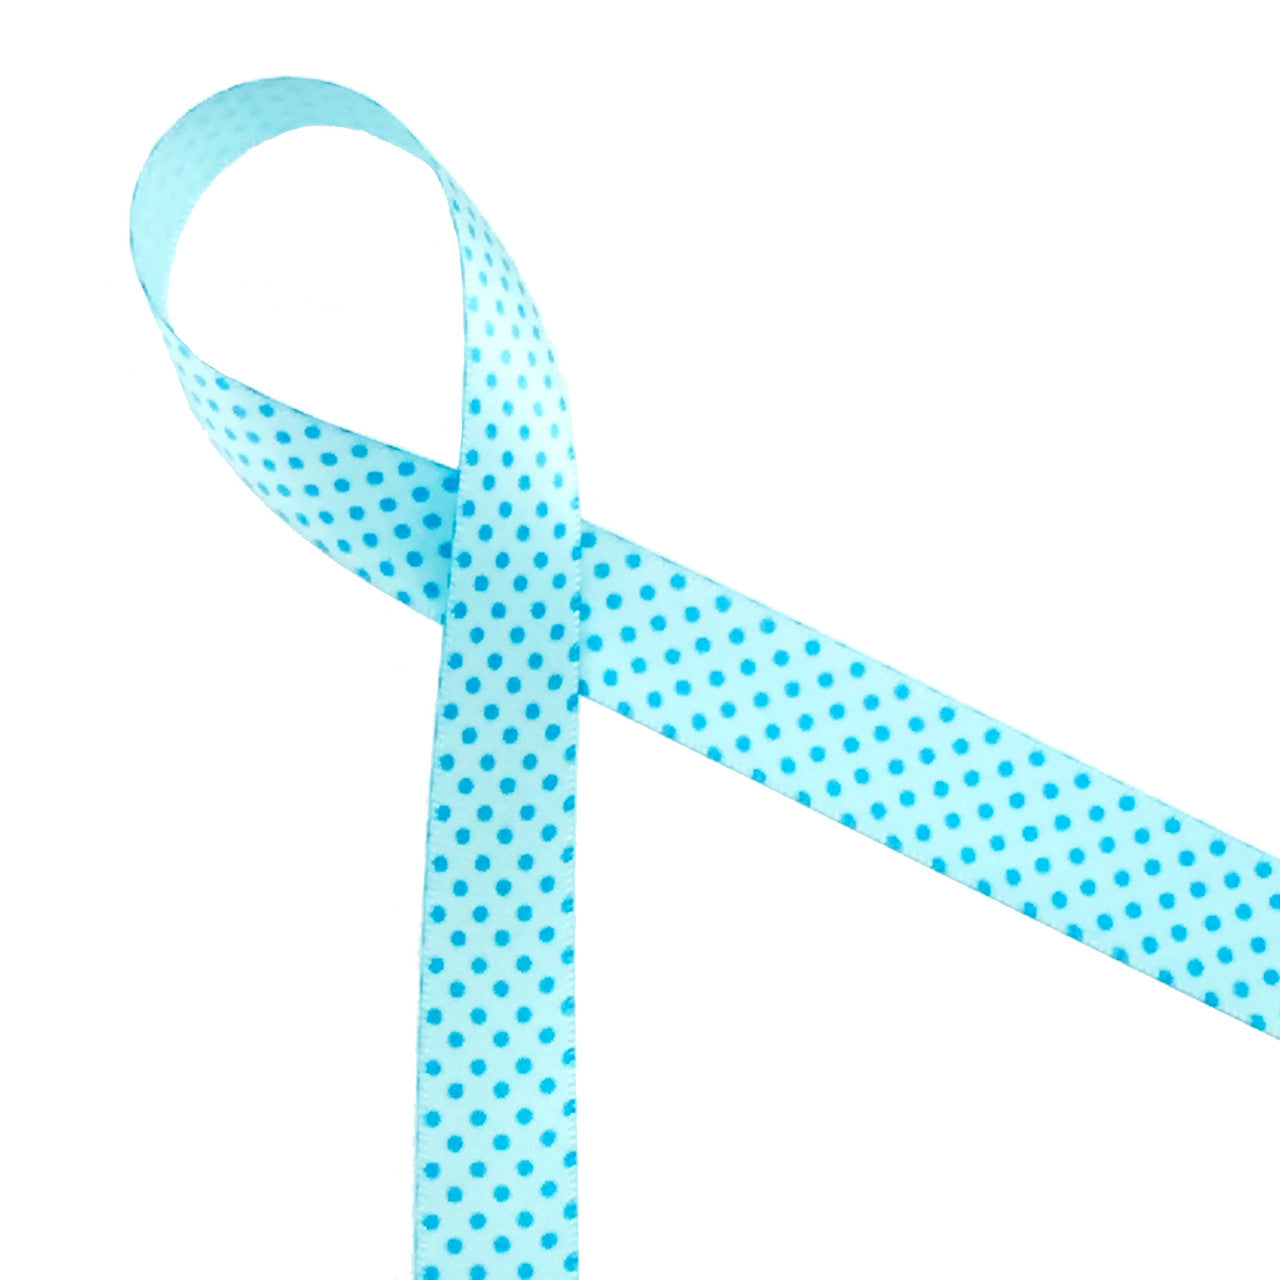 Blue pin dots on 5/8" light blue ribbon makes for a sweet accent to mix and match or use on it's own for a baby shower or baby boy gift! This little blue dotted ribbon also coordinates with many of our Spring and Easter ribbons!